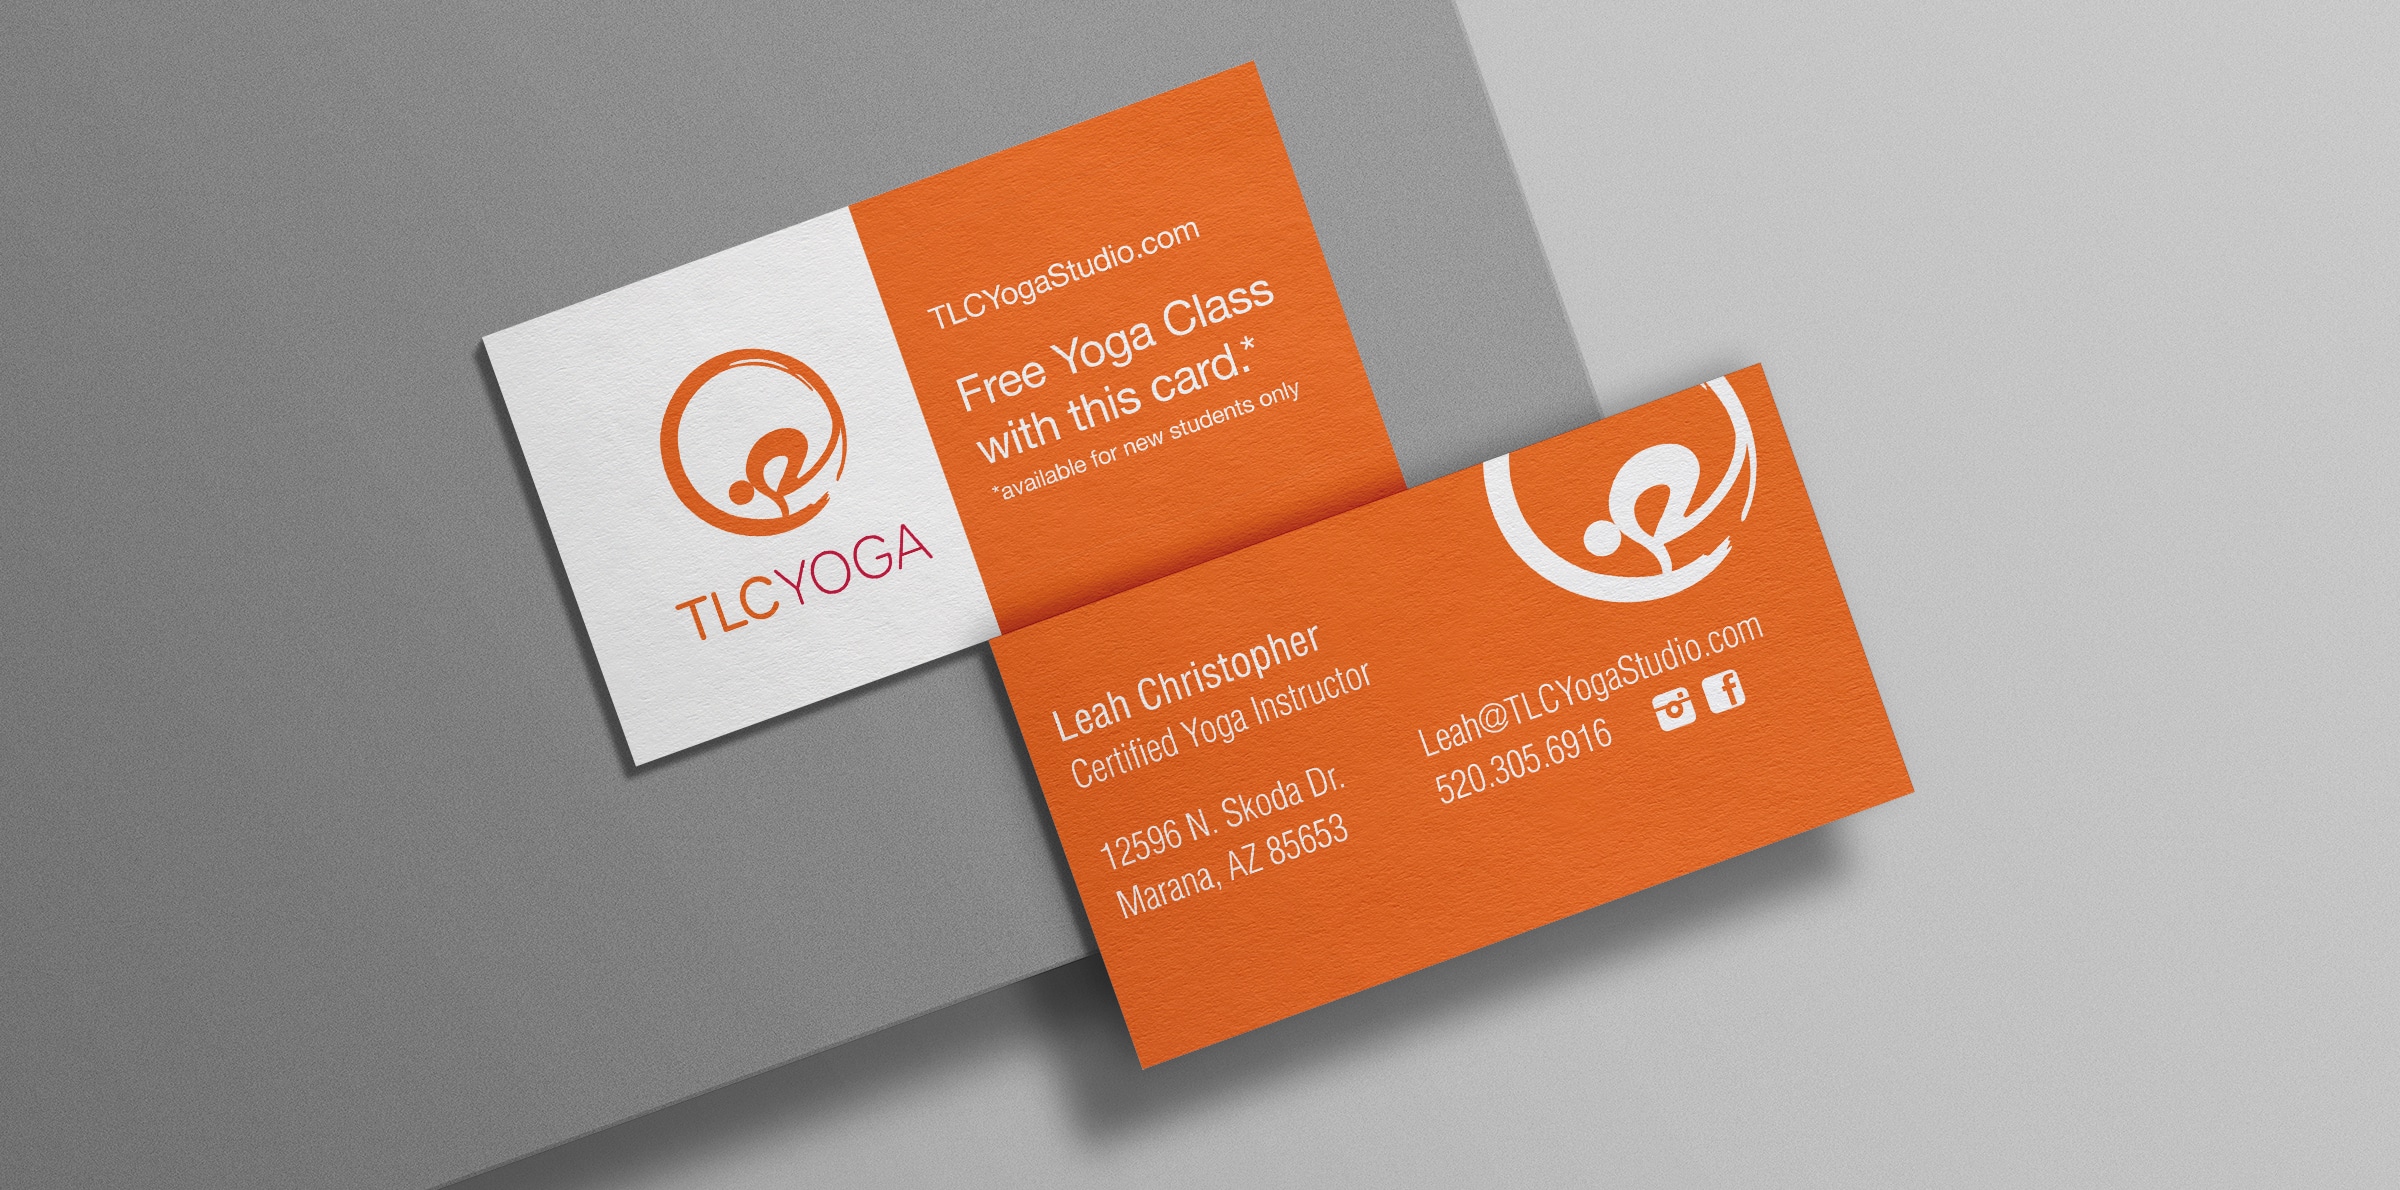 TLC Yoga studio logo shown on orange and white business cards against a grey background.